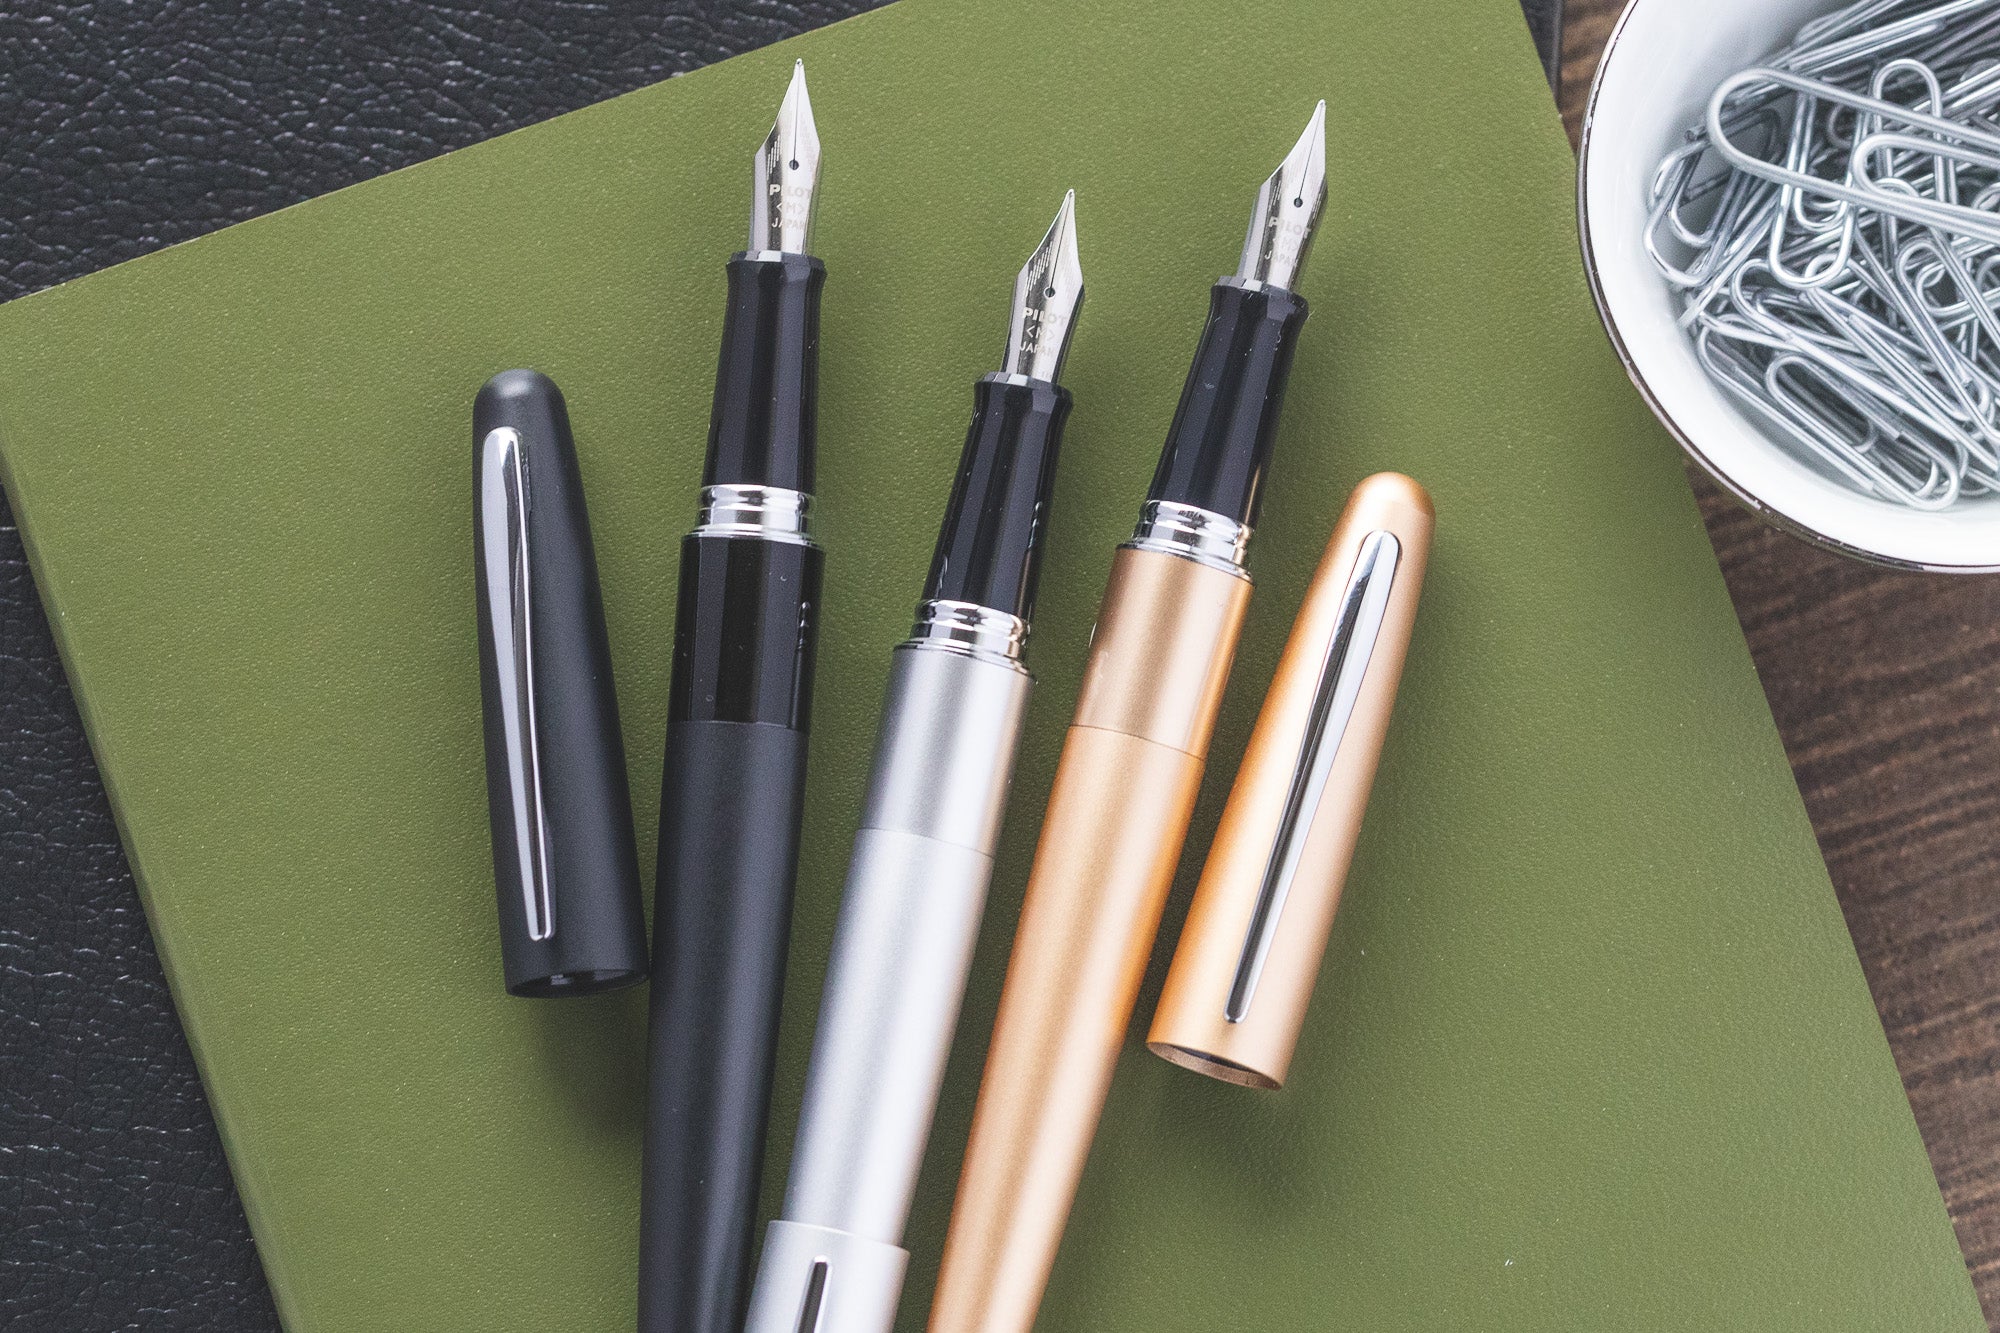 Black, Silver and Sold Pilot Metropolitans uncapped on a green notebook